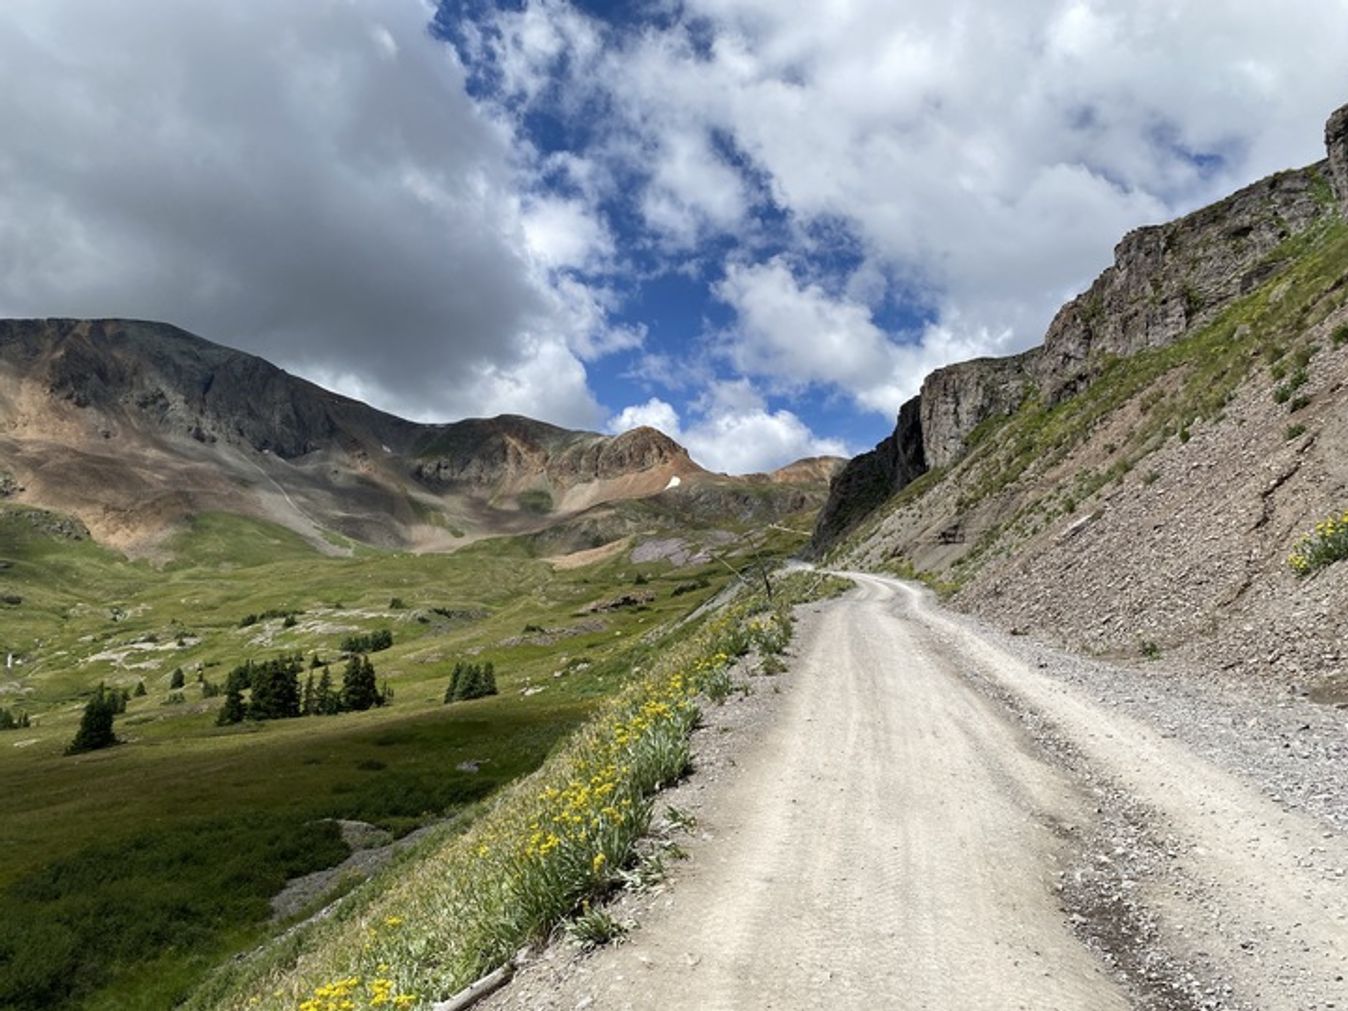 The high mountains of the San Juan's are some of the most splendid in all of the United States. Sepp Kuss has obscure dirt road KOMs all over them, including here on Cinnamon Pass, an old mining route that crests at 12,620 feet or 3,846 metres